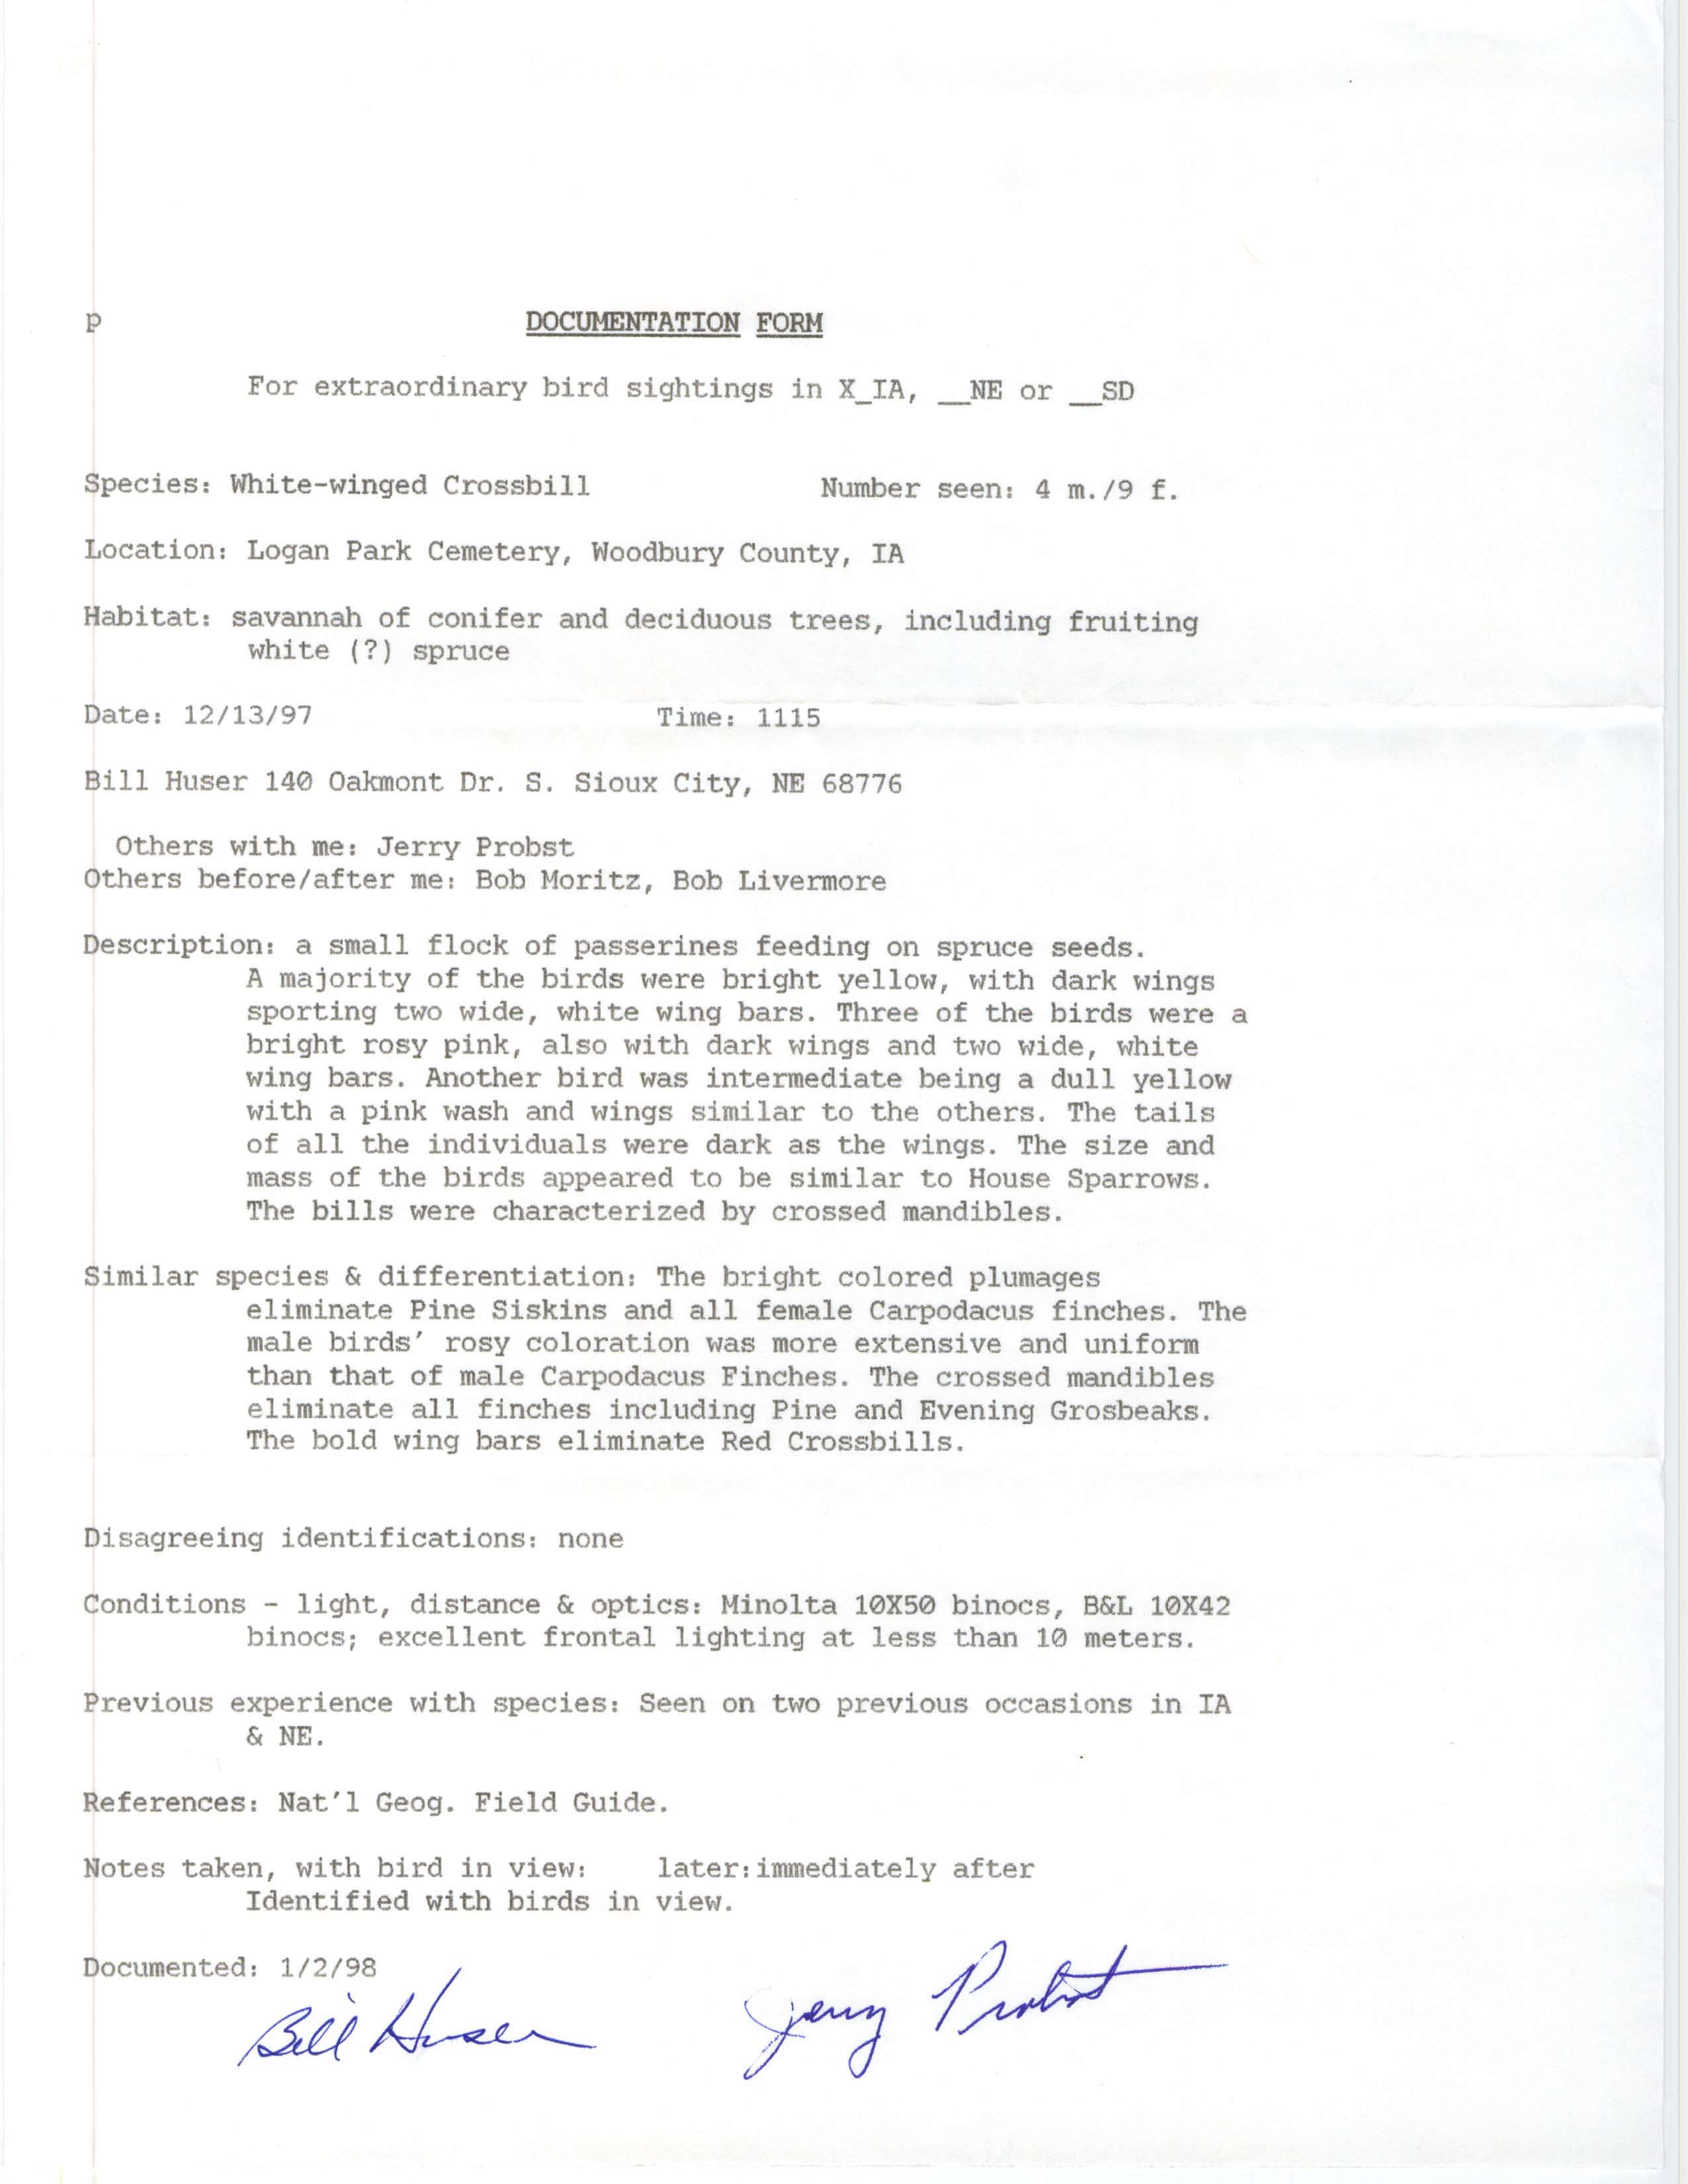 Rare bird documentation form for White-winged Crossbill at Logan Park Cemetery in Woodbury County, 1997